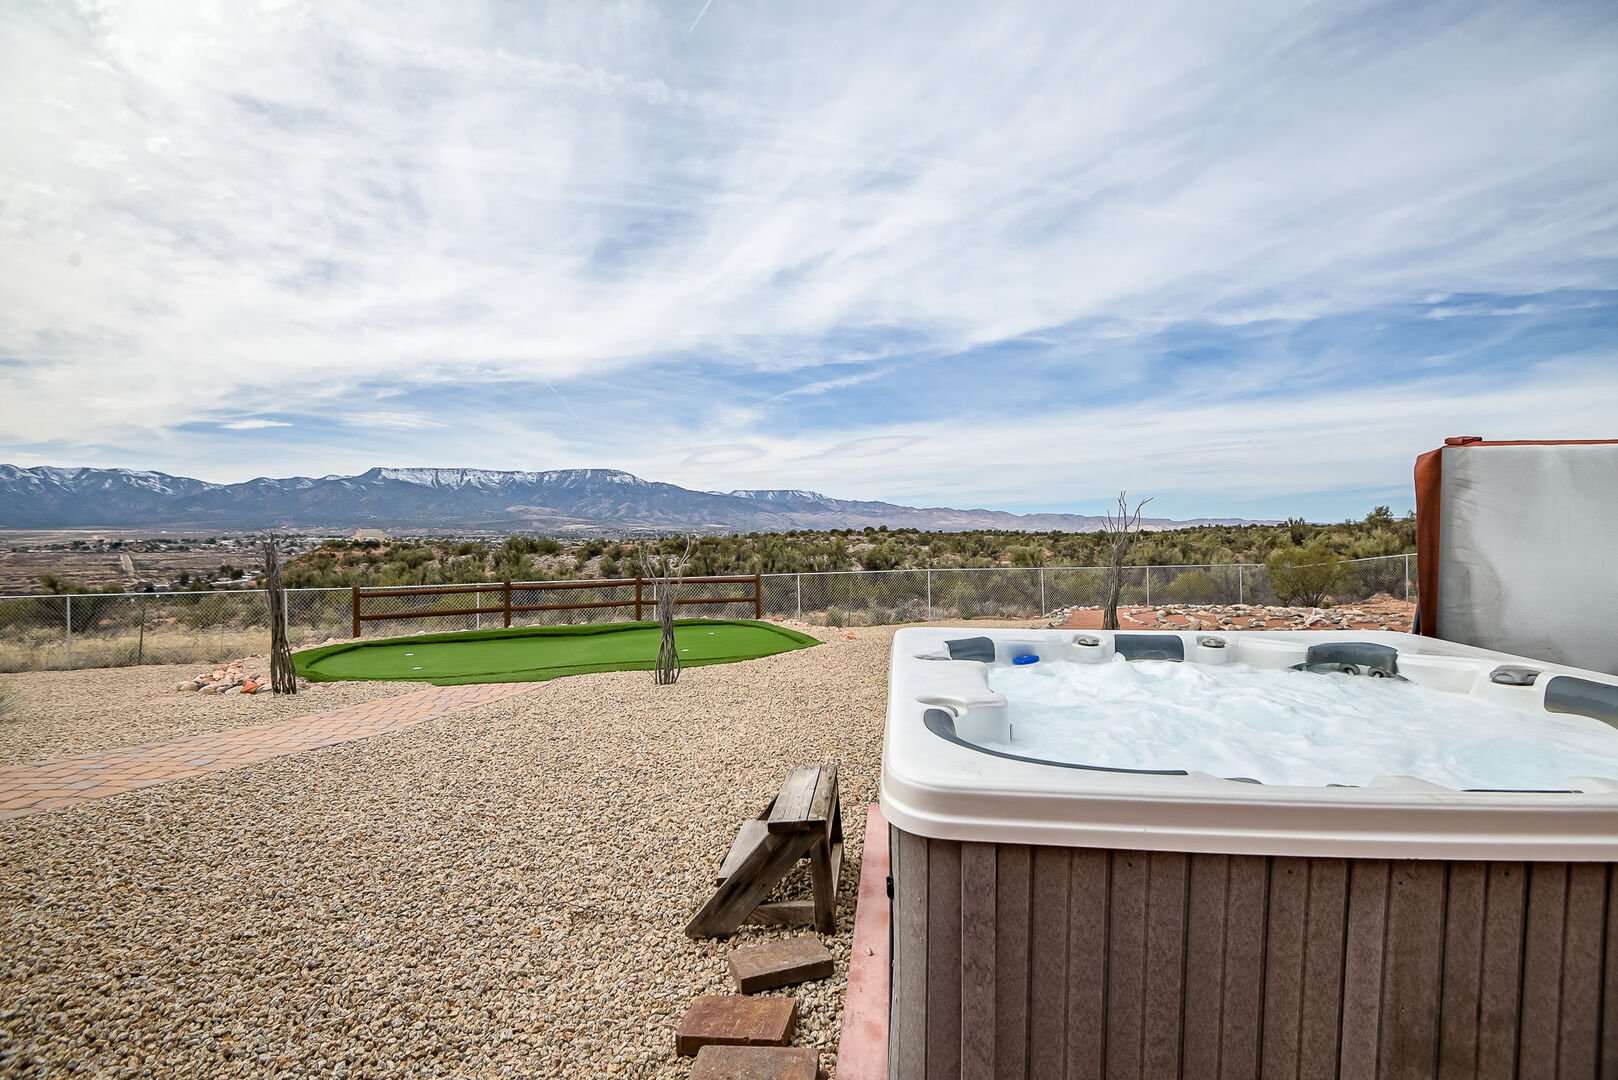 Enjoy the Views in the Hot Tub!